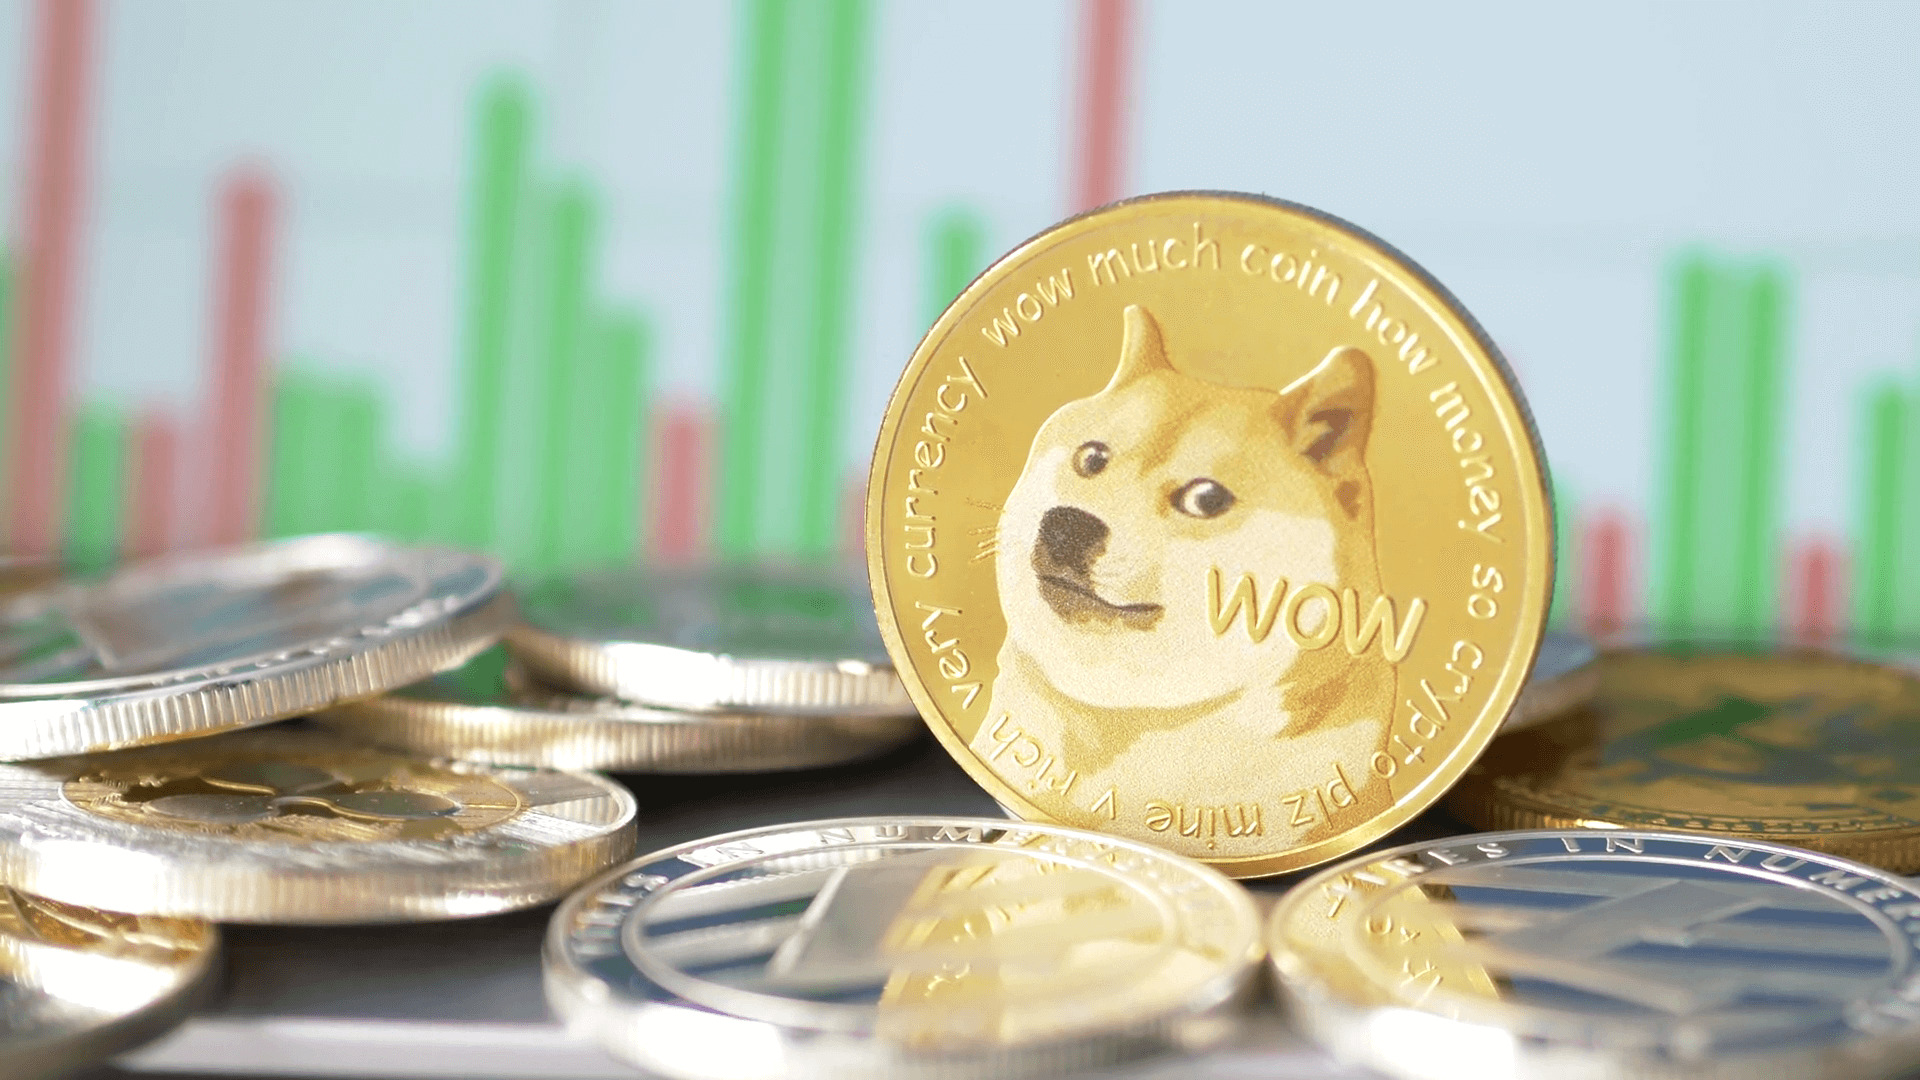 technology, dogecoin, cryptocurrency